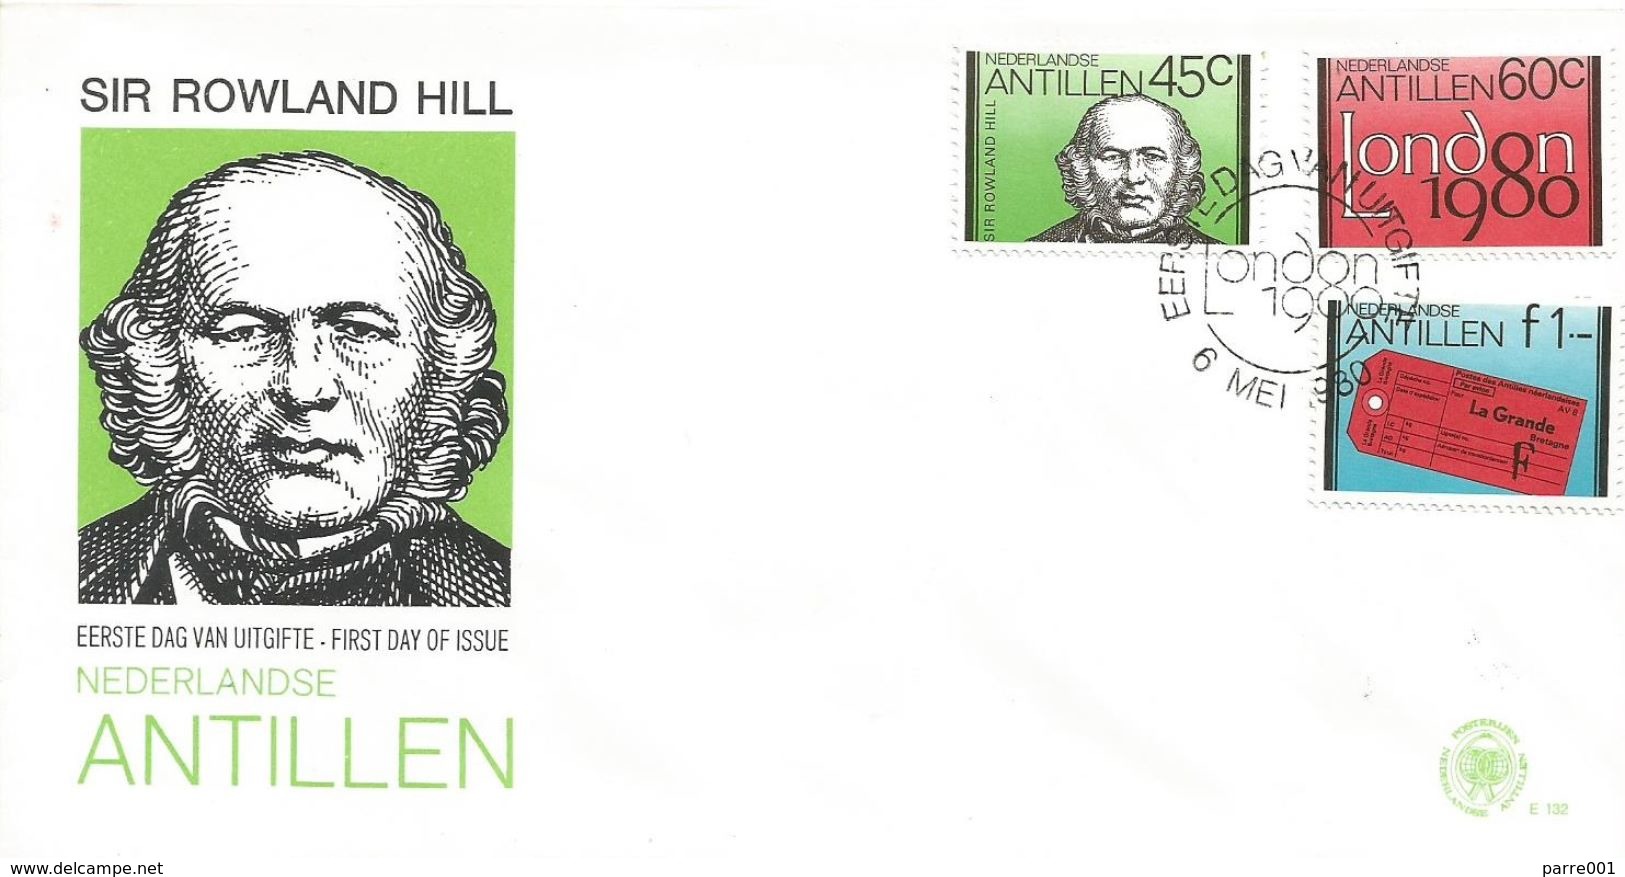 Netherlands Antilles 1980 Curacao Sir Rowland Hill Mailbag Label FDC Cover - Rowland Hill